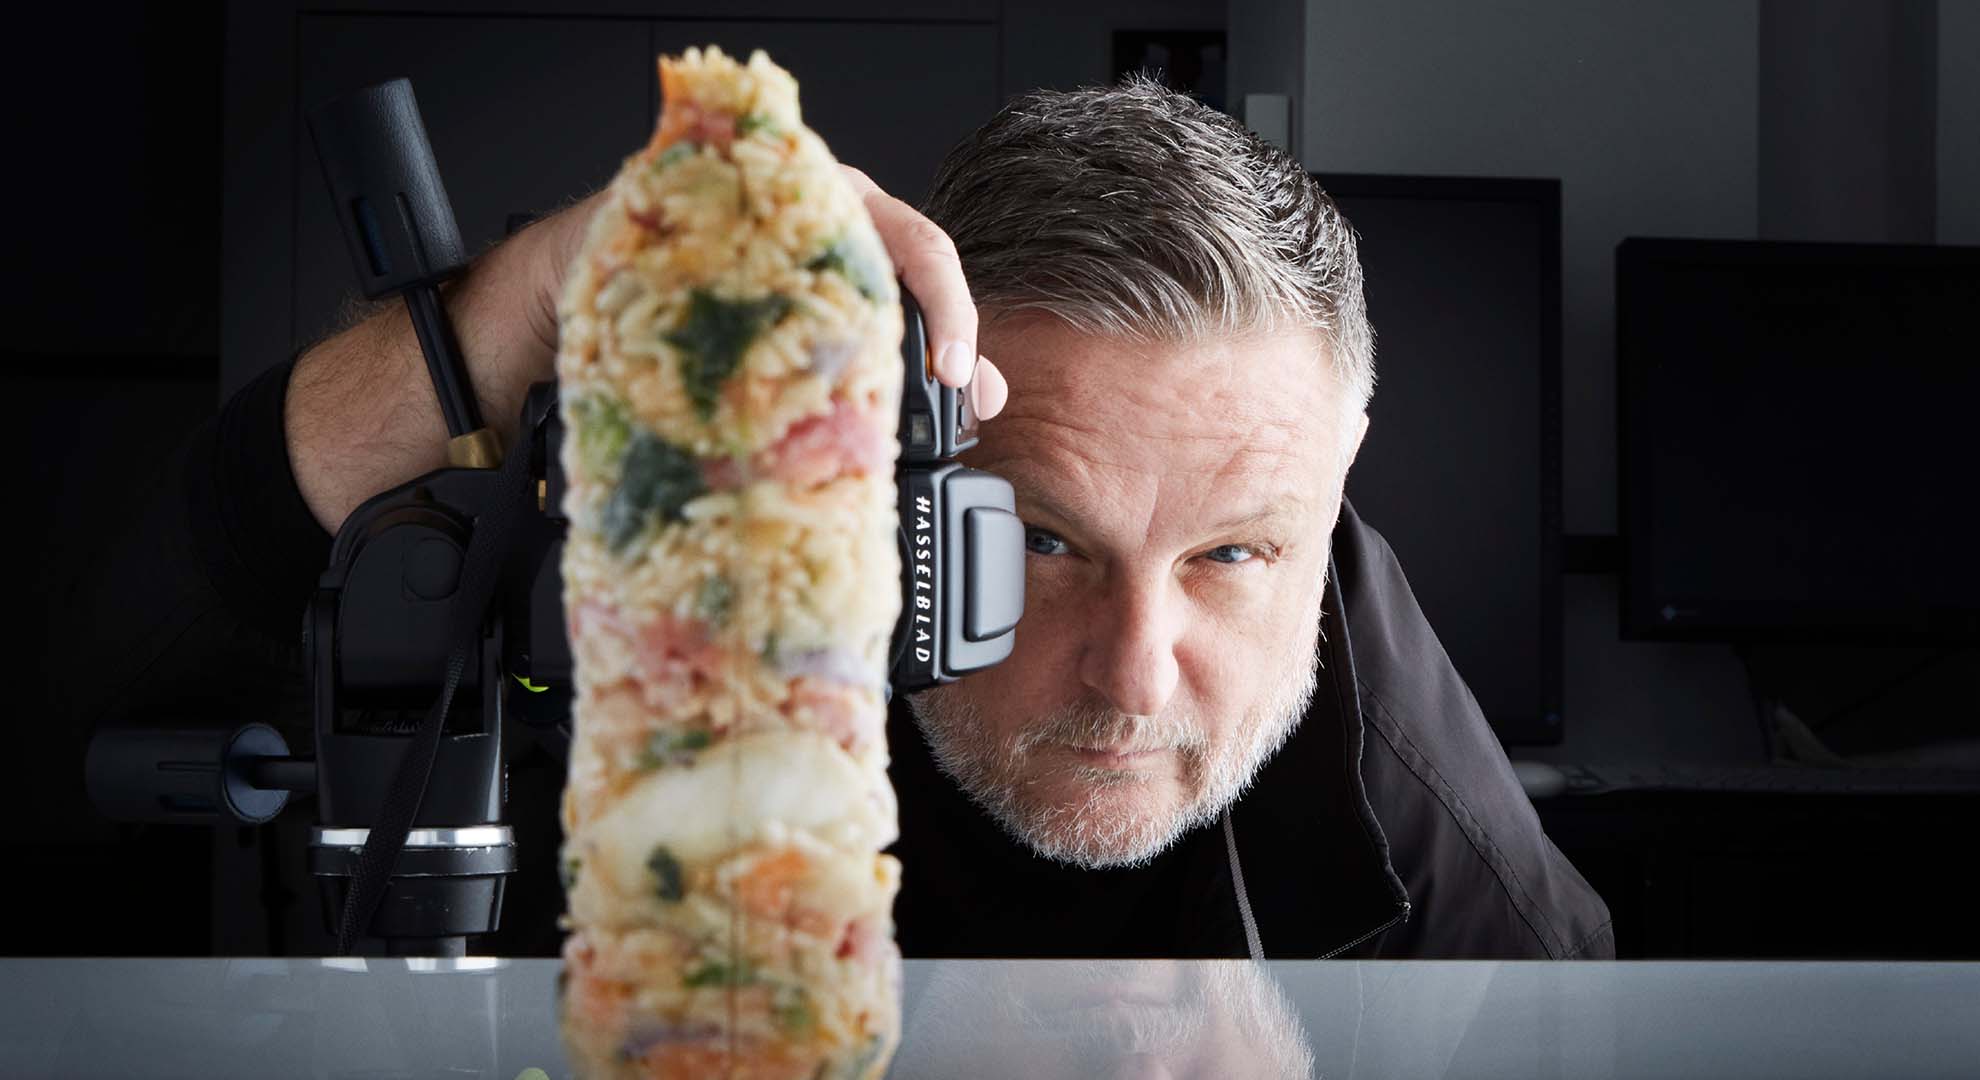 Photographer 'Rankin', holding a camera in front of a bottle shape made from food waste